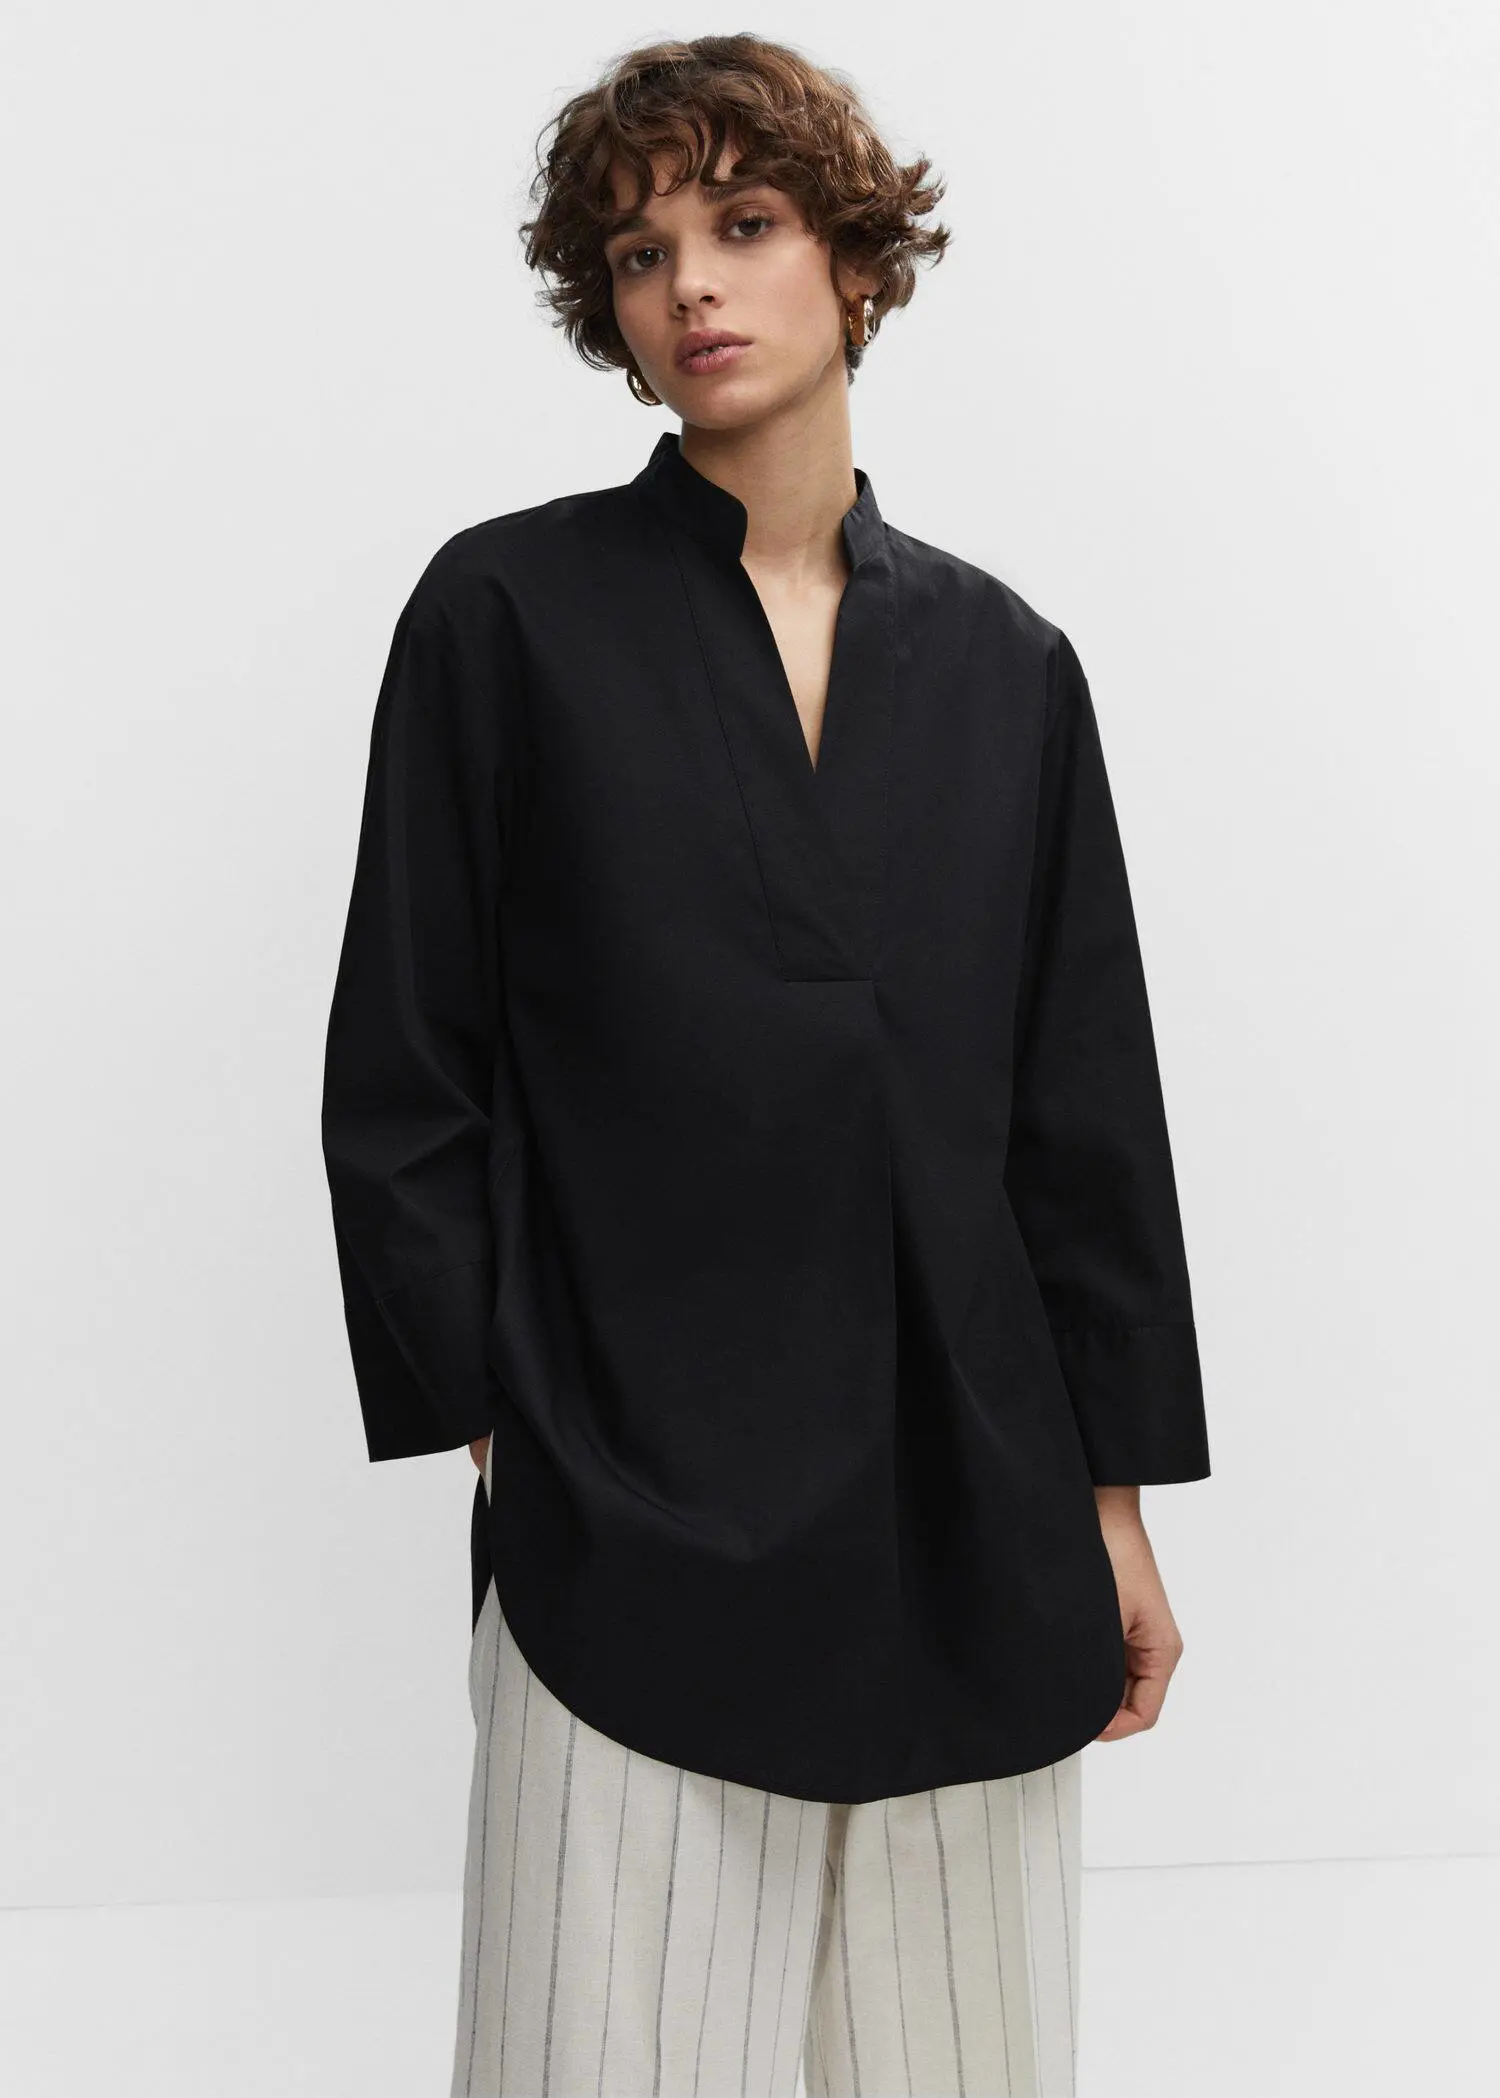 Mango Oversized V-neck blouse. a person wearing a black shirt standing next to a wall 